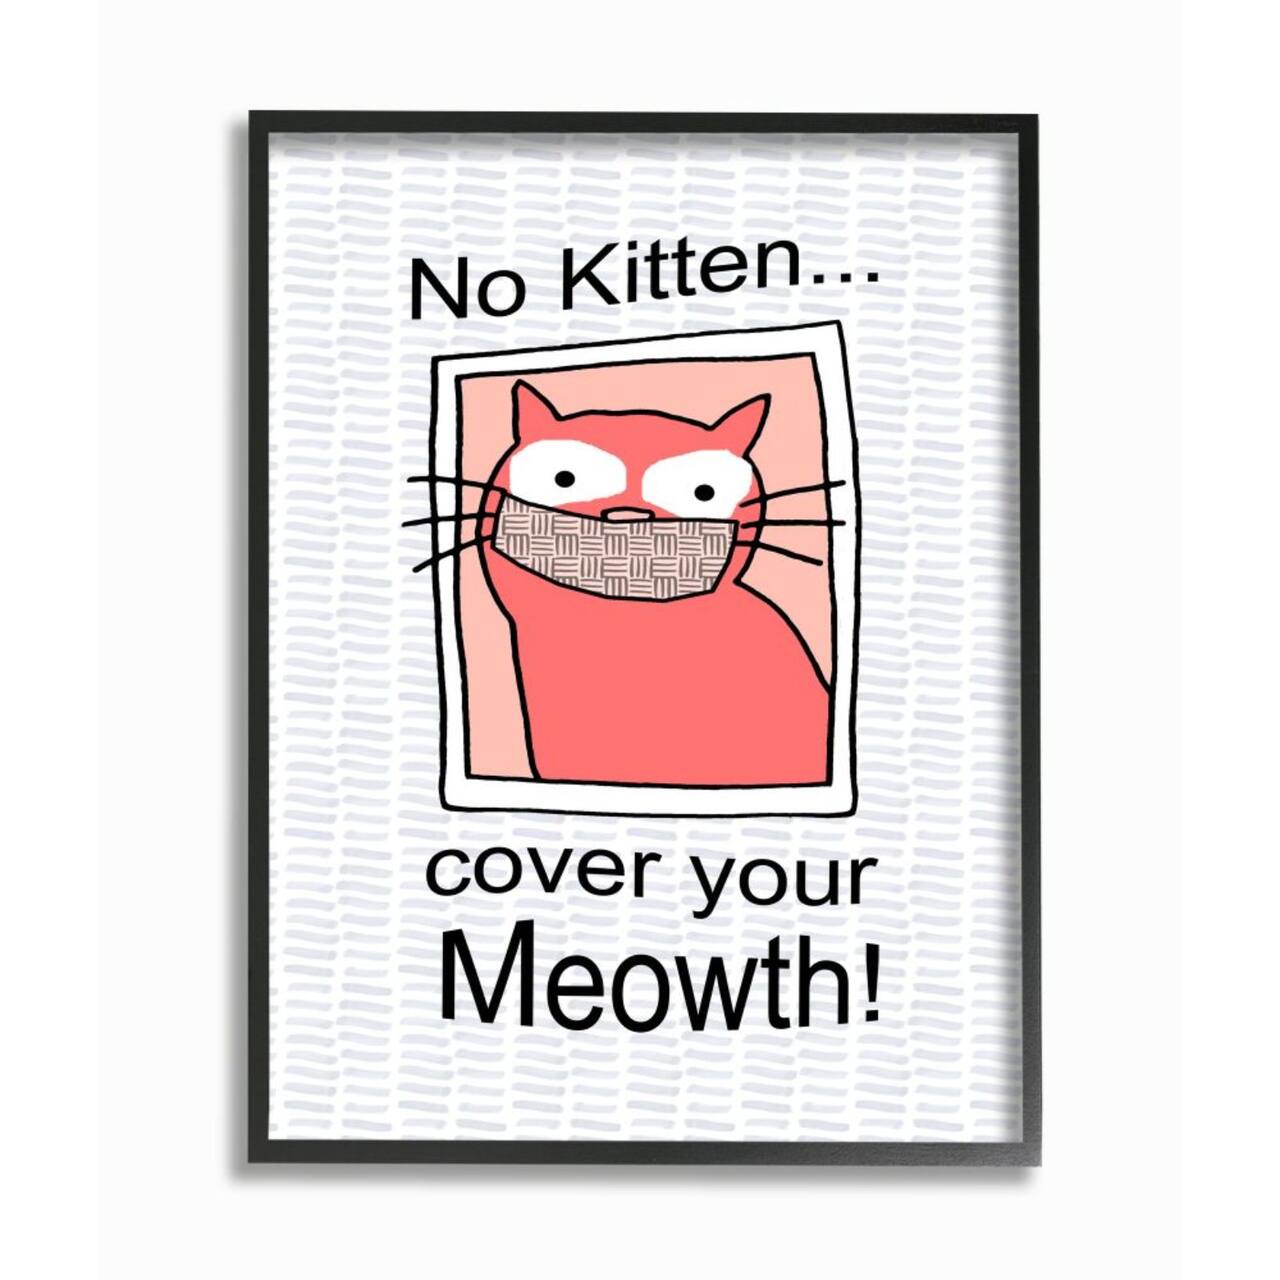 Stupell Industries No Kitten Cover Your Meowth Wall Art in Black Frame